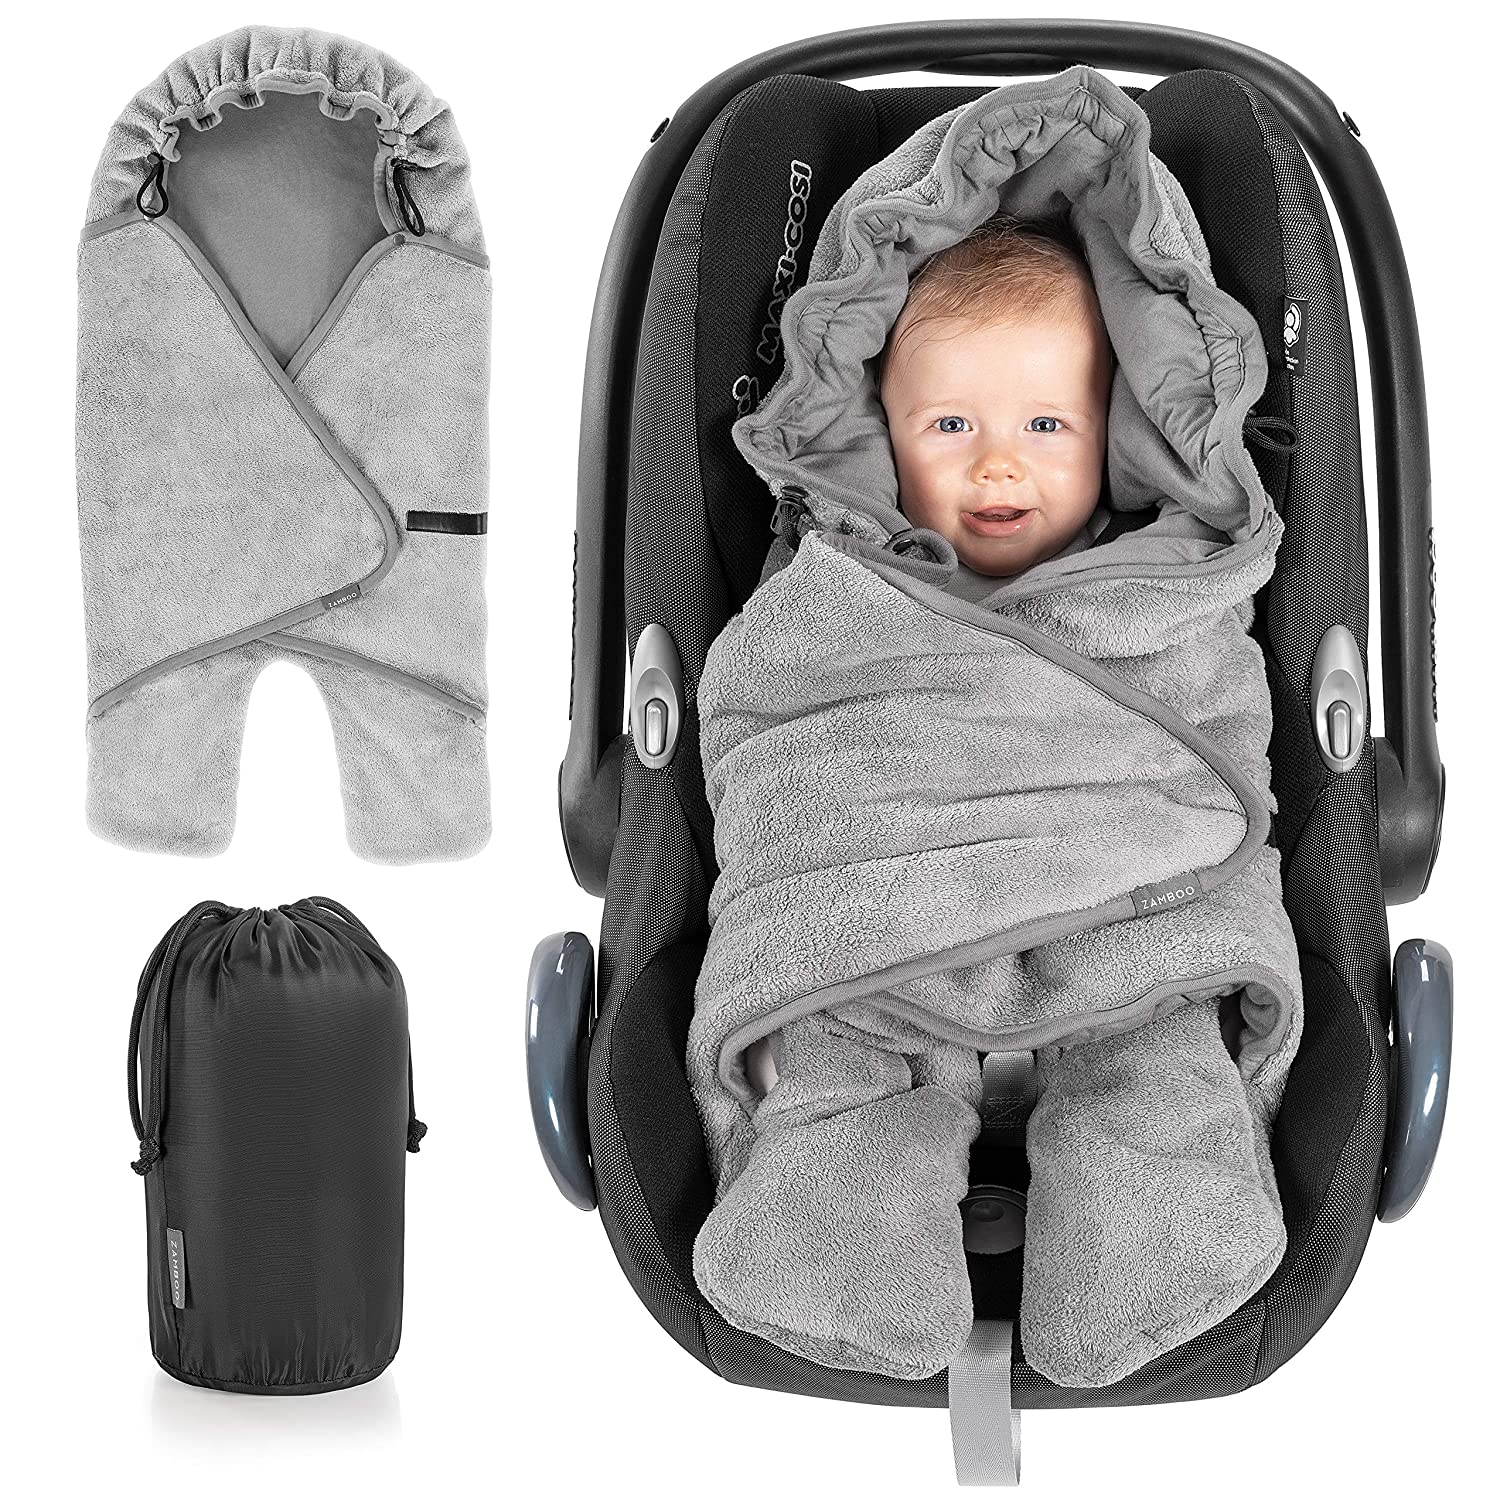 Zamboo Baby Swaddling Blanket with Feet - Spring/Summer - Lightweight Blanket for Baby Seats / Car Seats (Fits Maxi-Cosi, Cybex, Römer) and Pushchairs with Hood and Bag - Grey